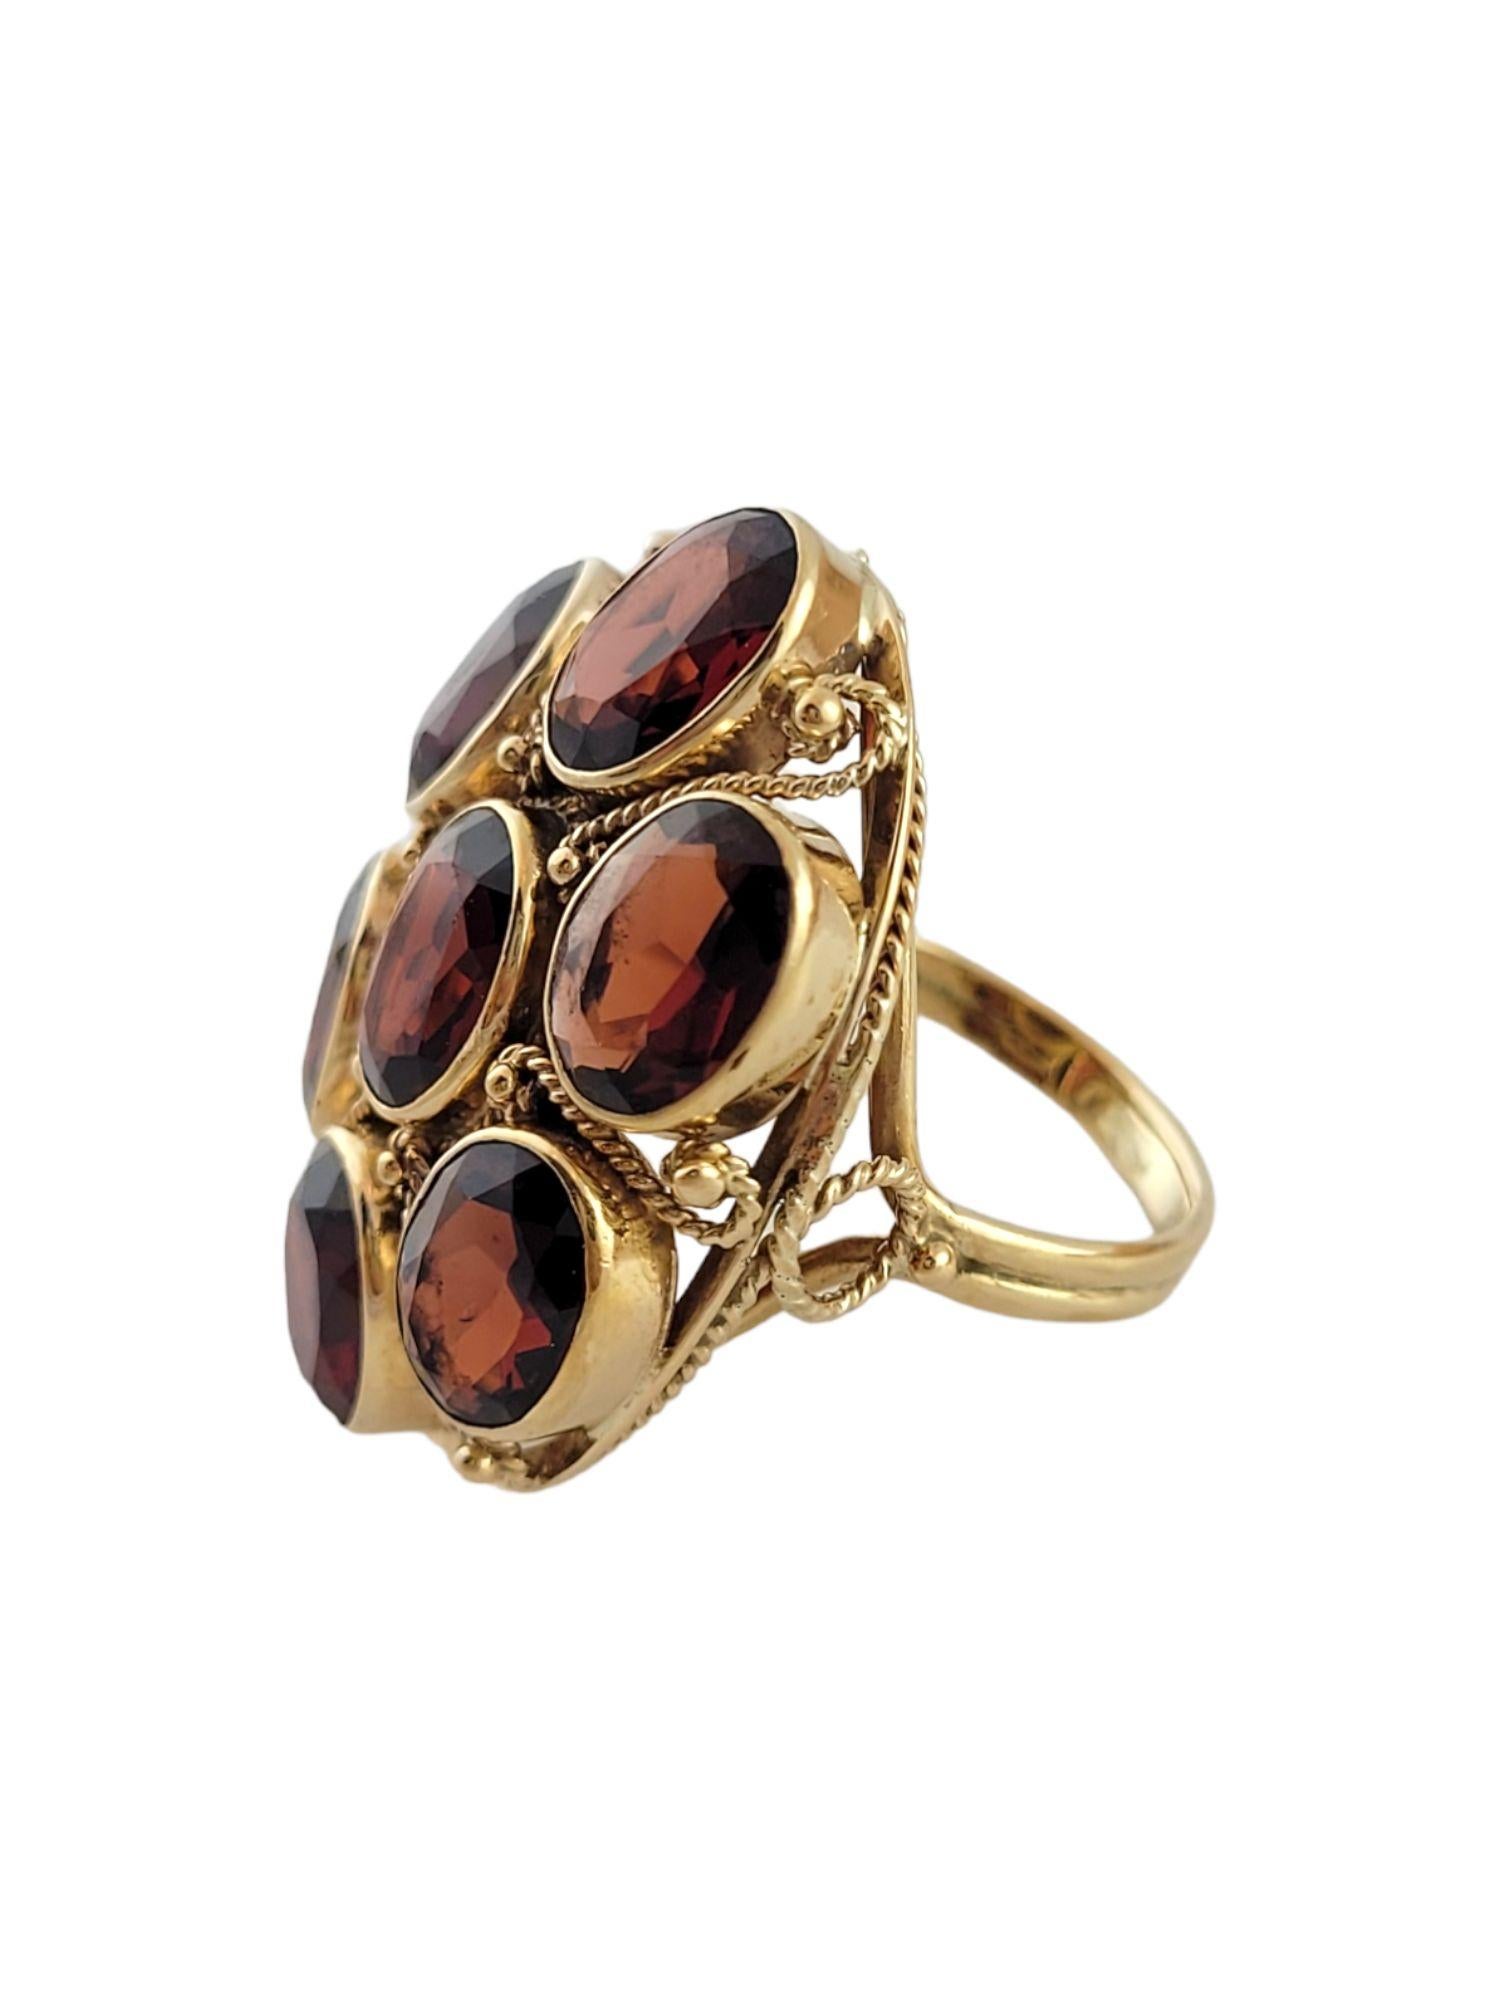 Gorgeous 14K gold cocktail ring with 9 beautiful almandine garnets!

9.80 cts.  in garnets. stones are eye clean with medium light brownish red color and good cut

Ring size: 6

Shank: 2.6mm

Front: 30.1mm X 23.1mm X 8.7mm

Weight: 9.12 g/ 5.9